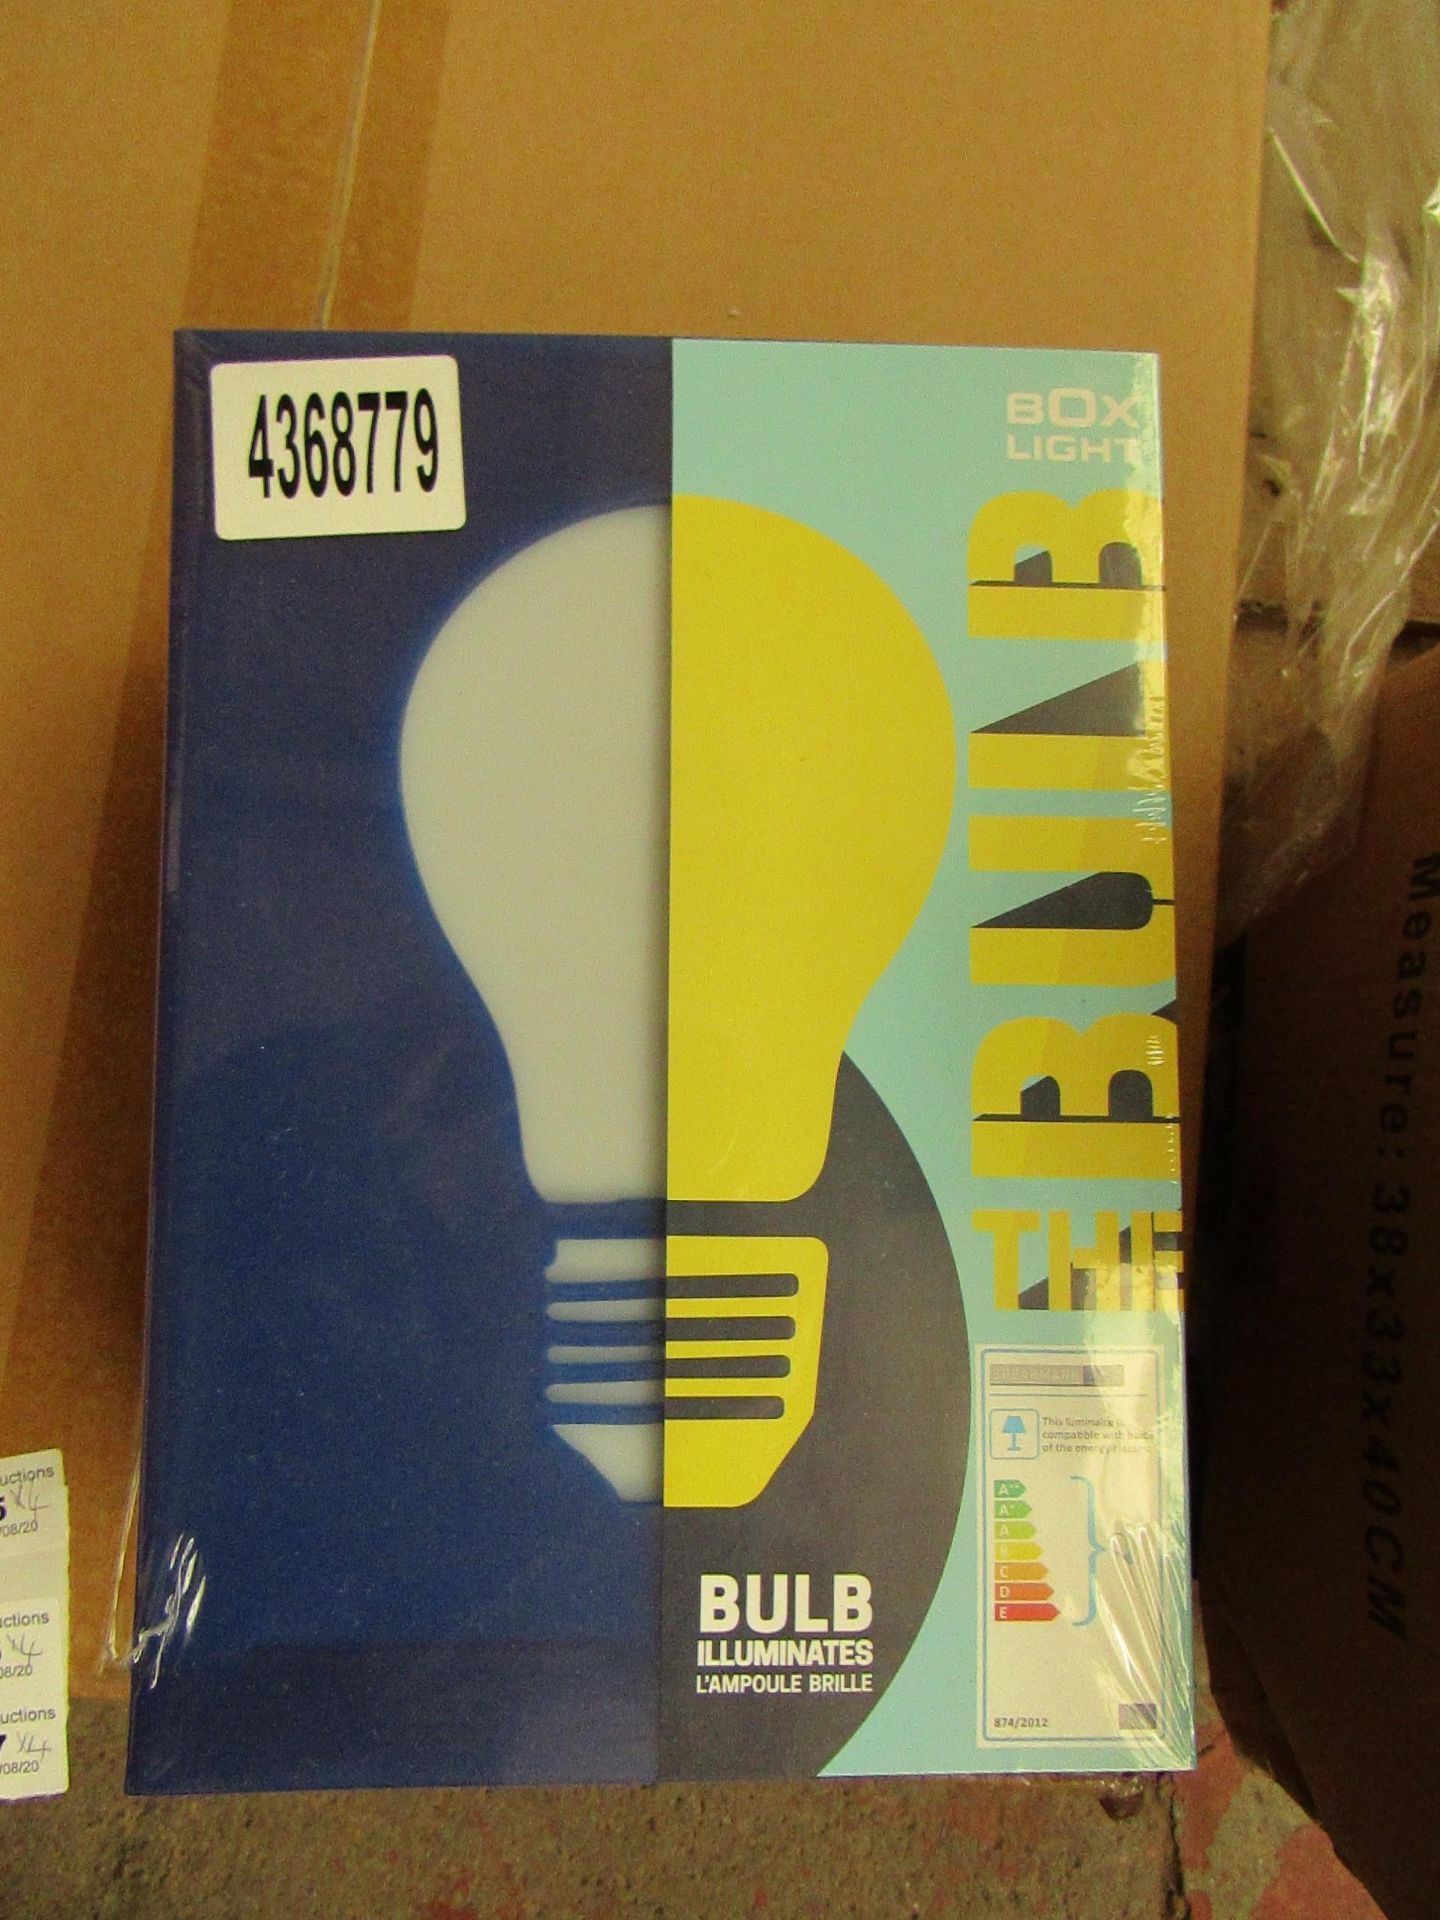 4x The Bulb - Light Boxed. - New & Packaged.